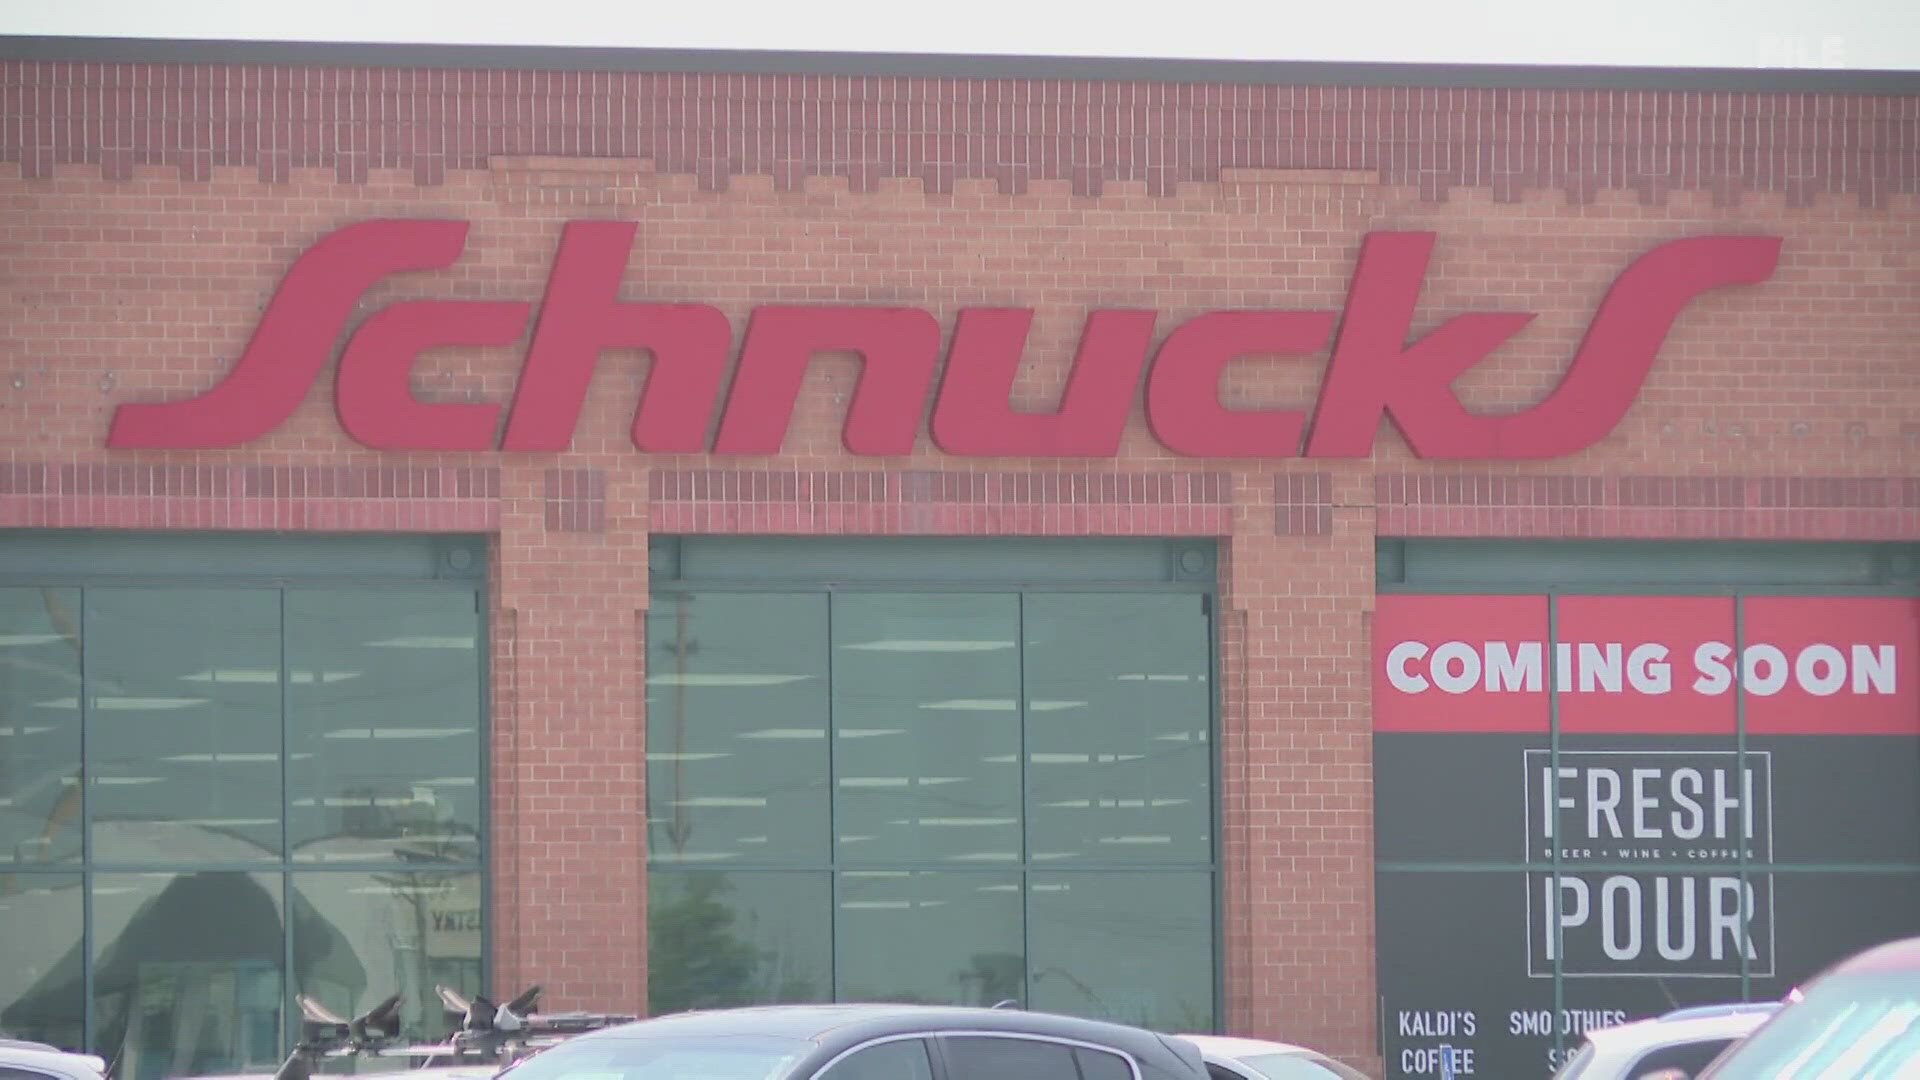 Contract negotiations are heating up between Schnucks and its truck drivers. Drivers demand a pay raise and better health benefits from the local grocery chain.